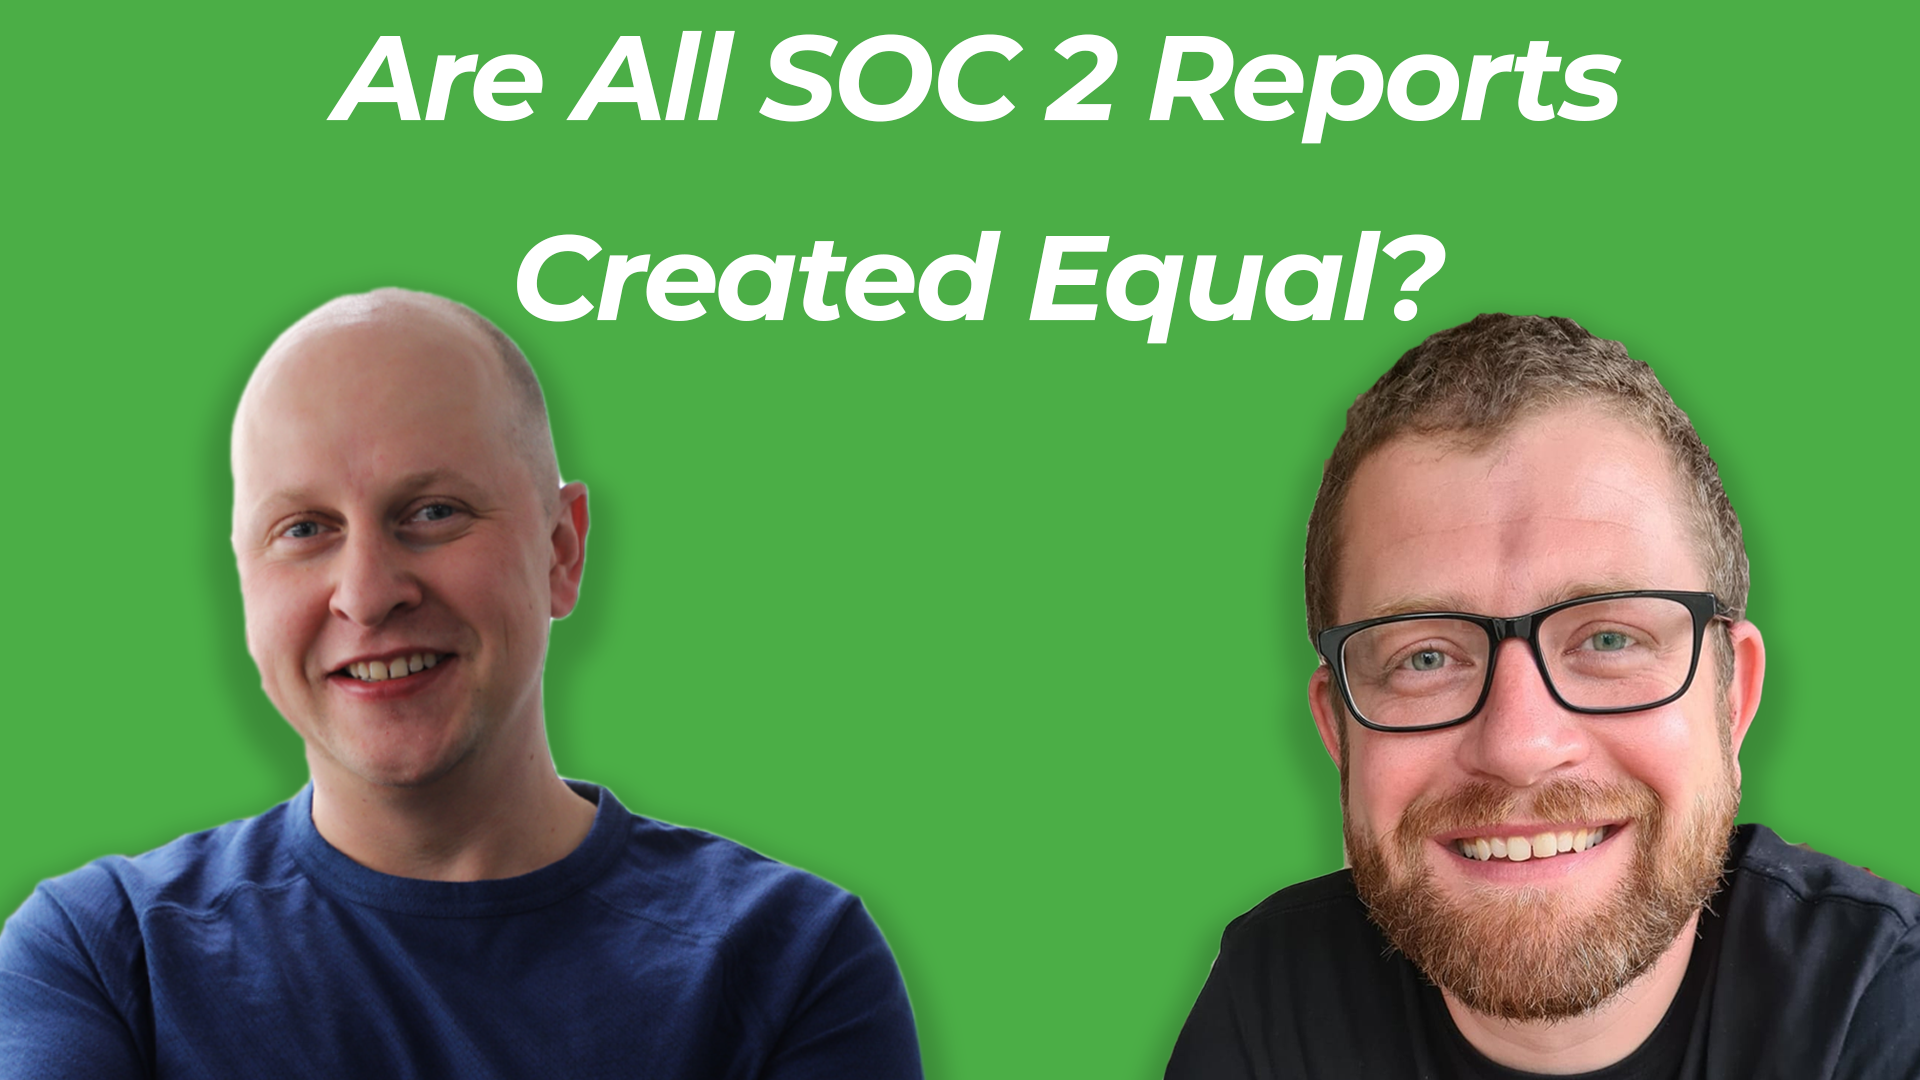 Compyl Not all SOC 2 reports are created equal